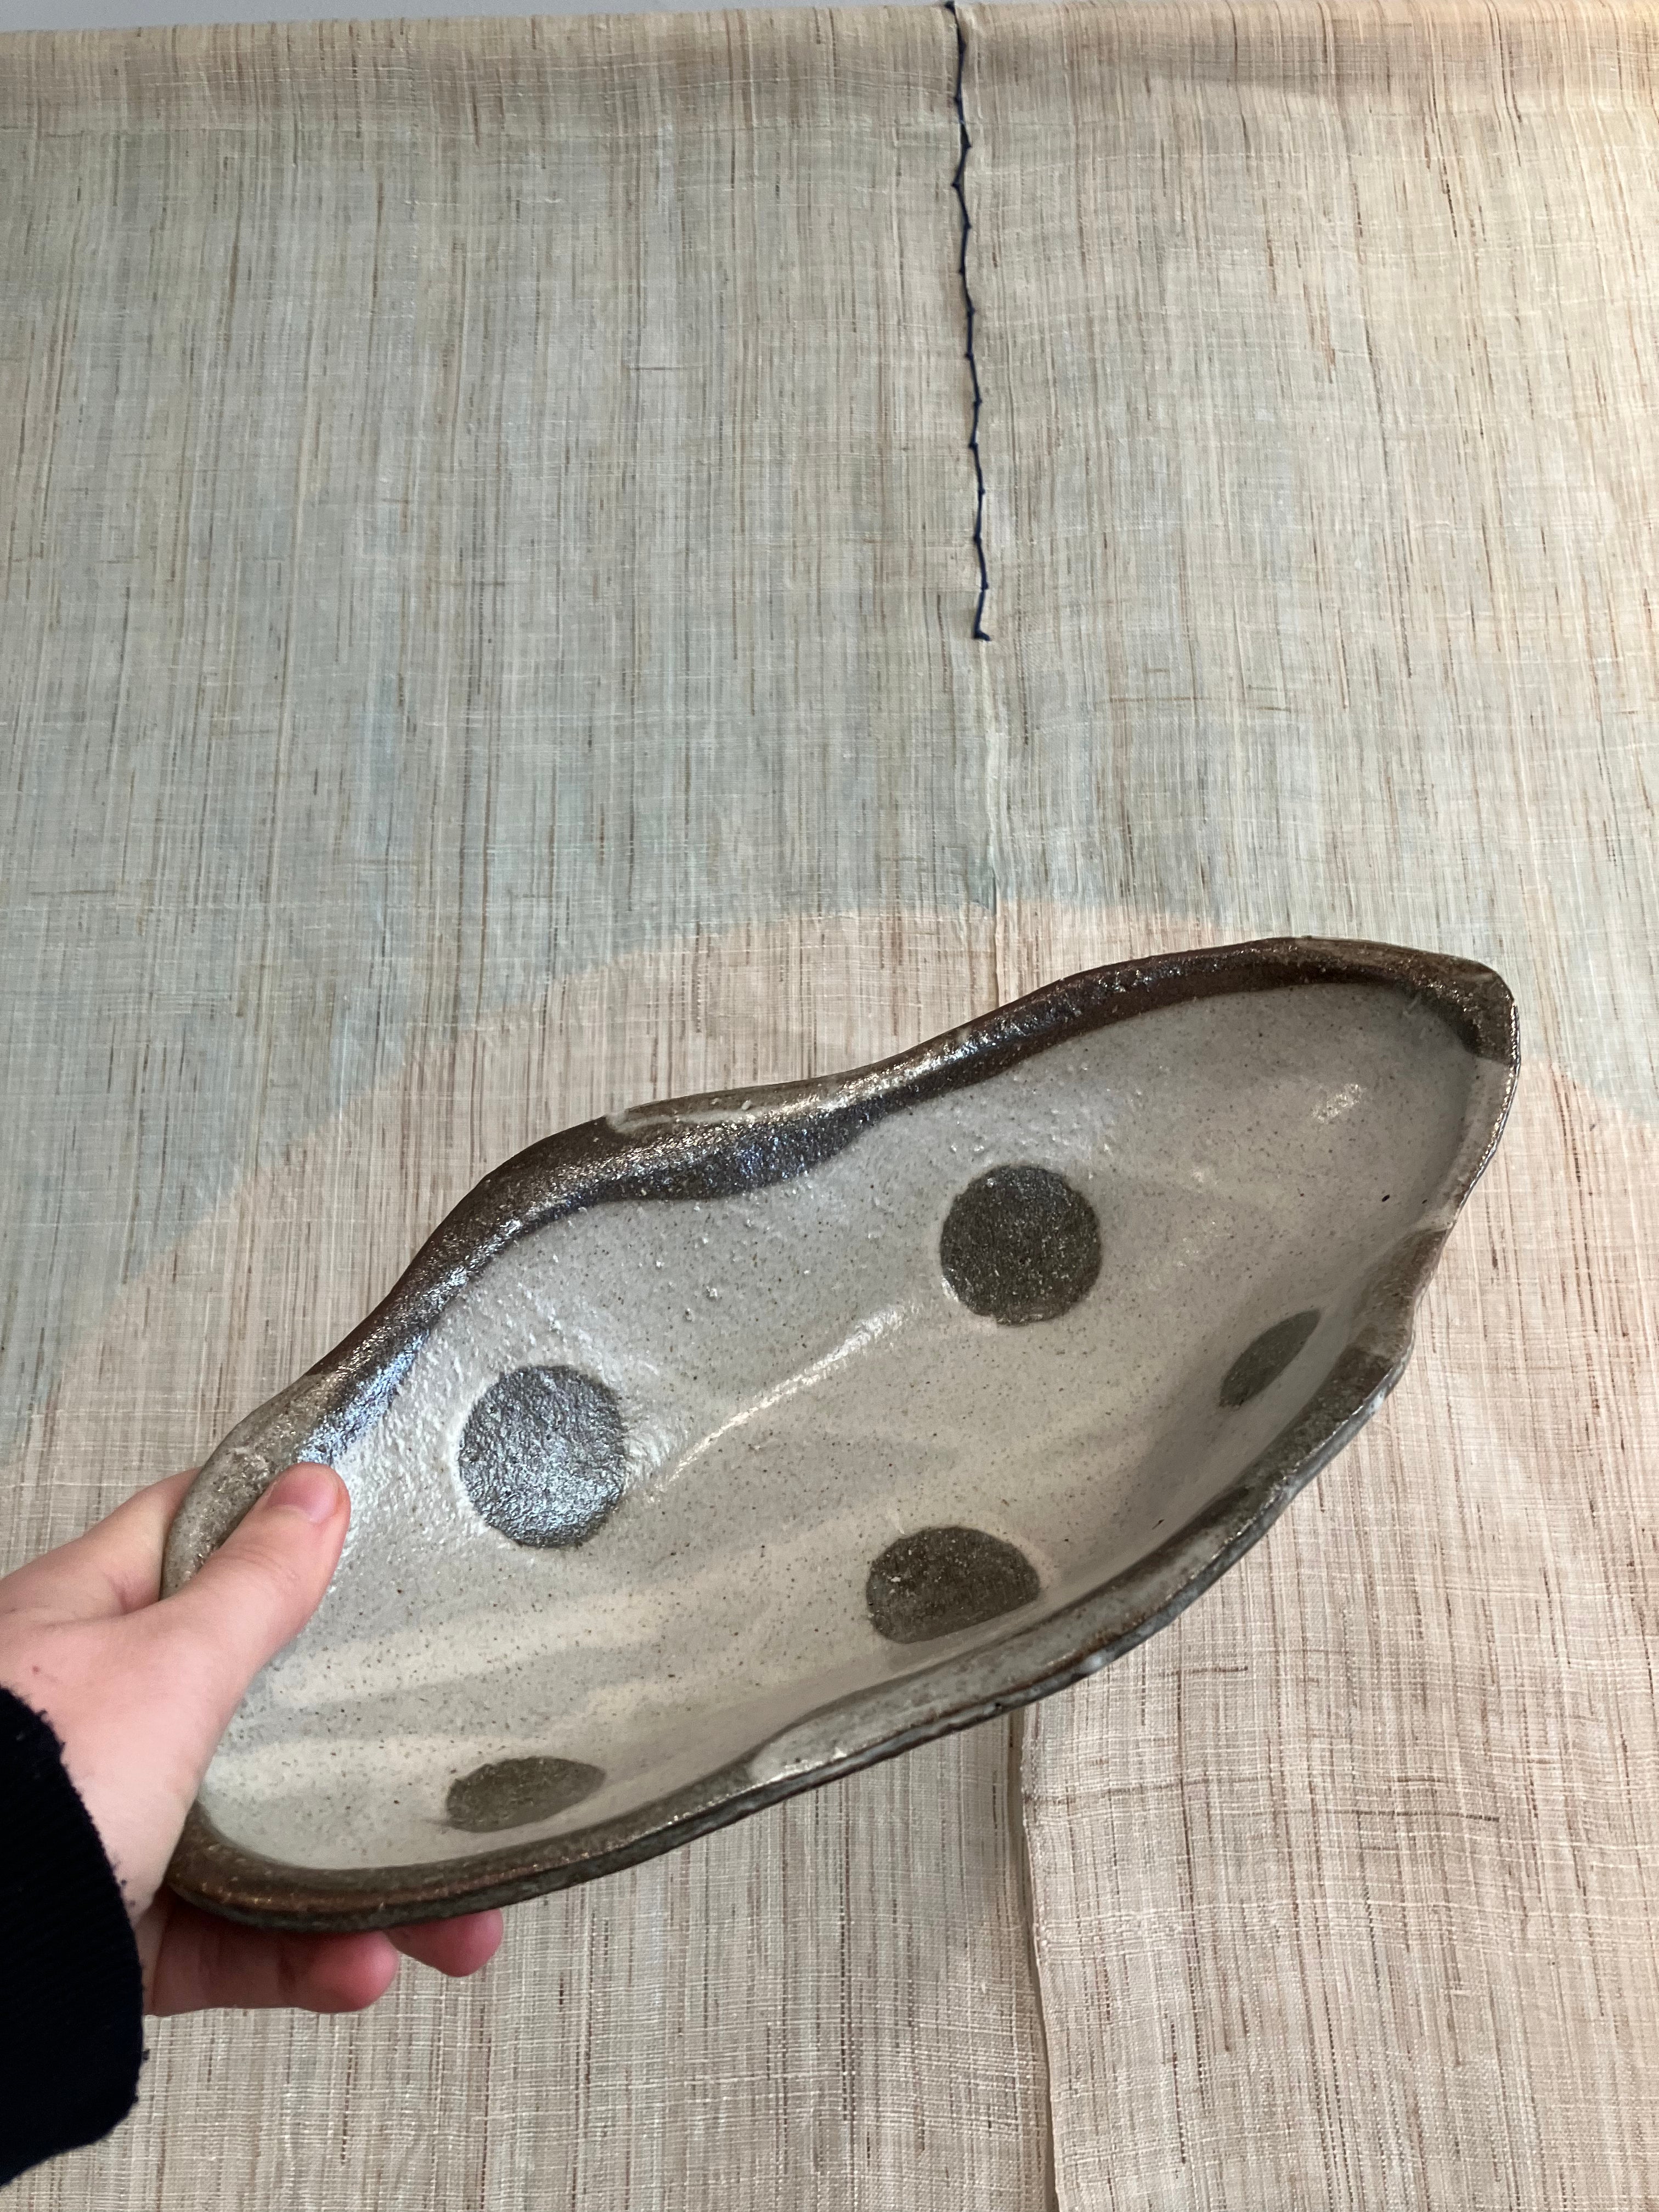 Handmade dish with gray glaze and brown dots